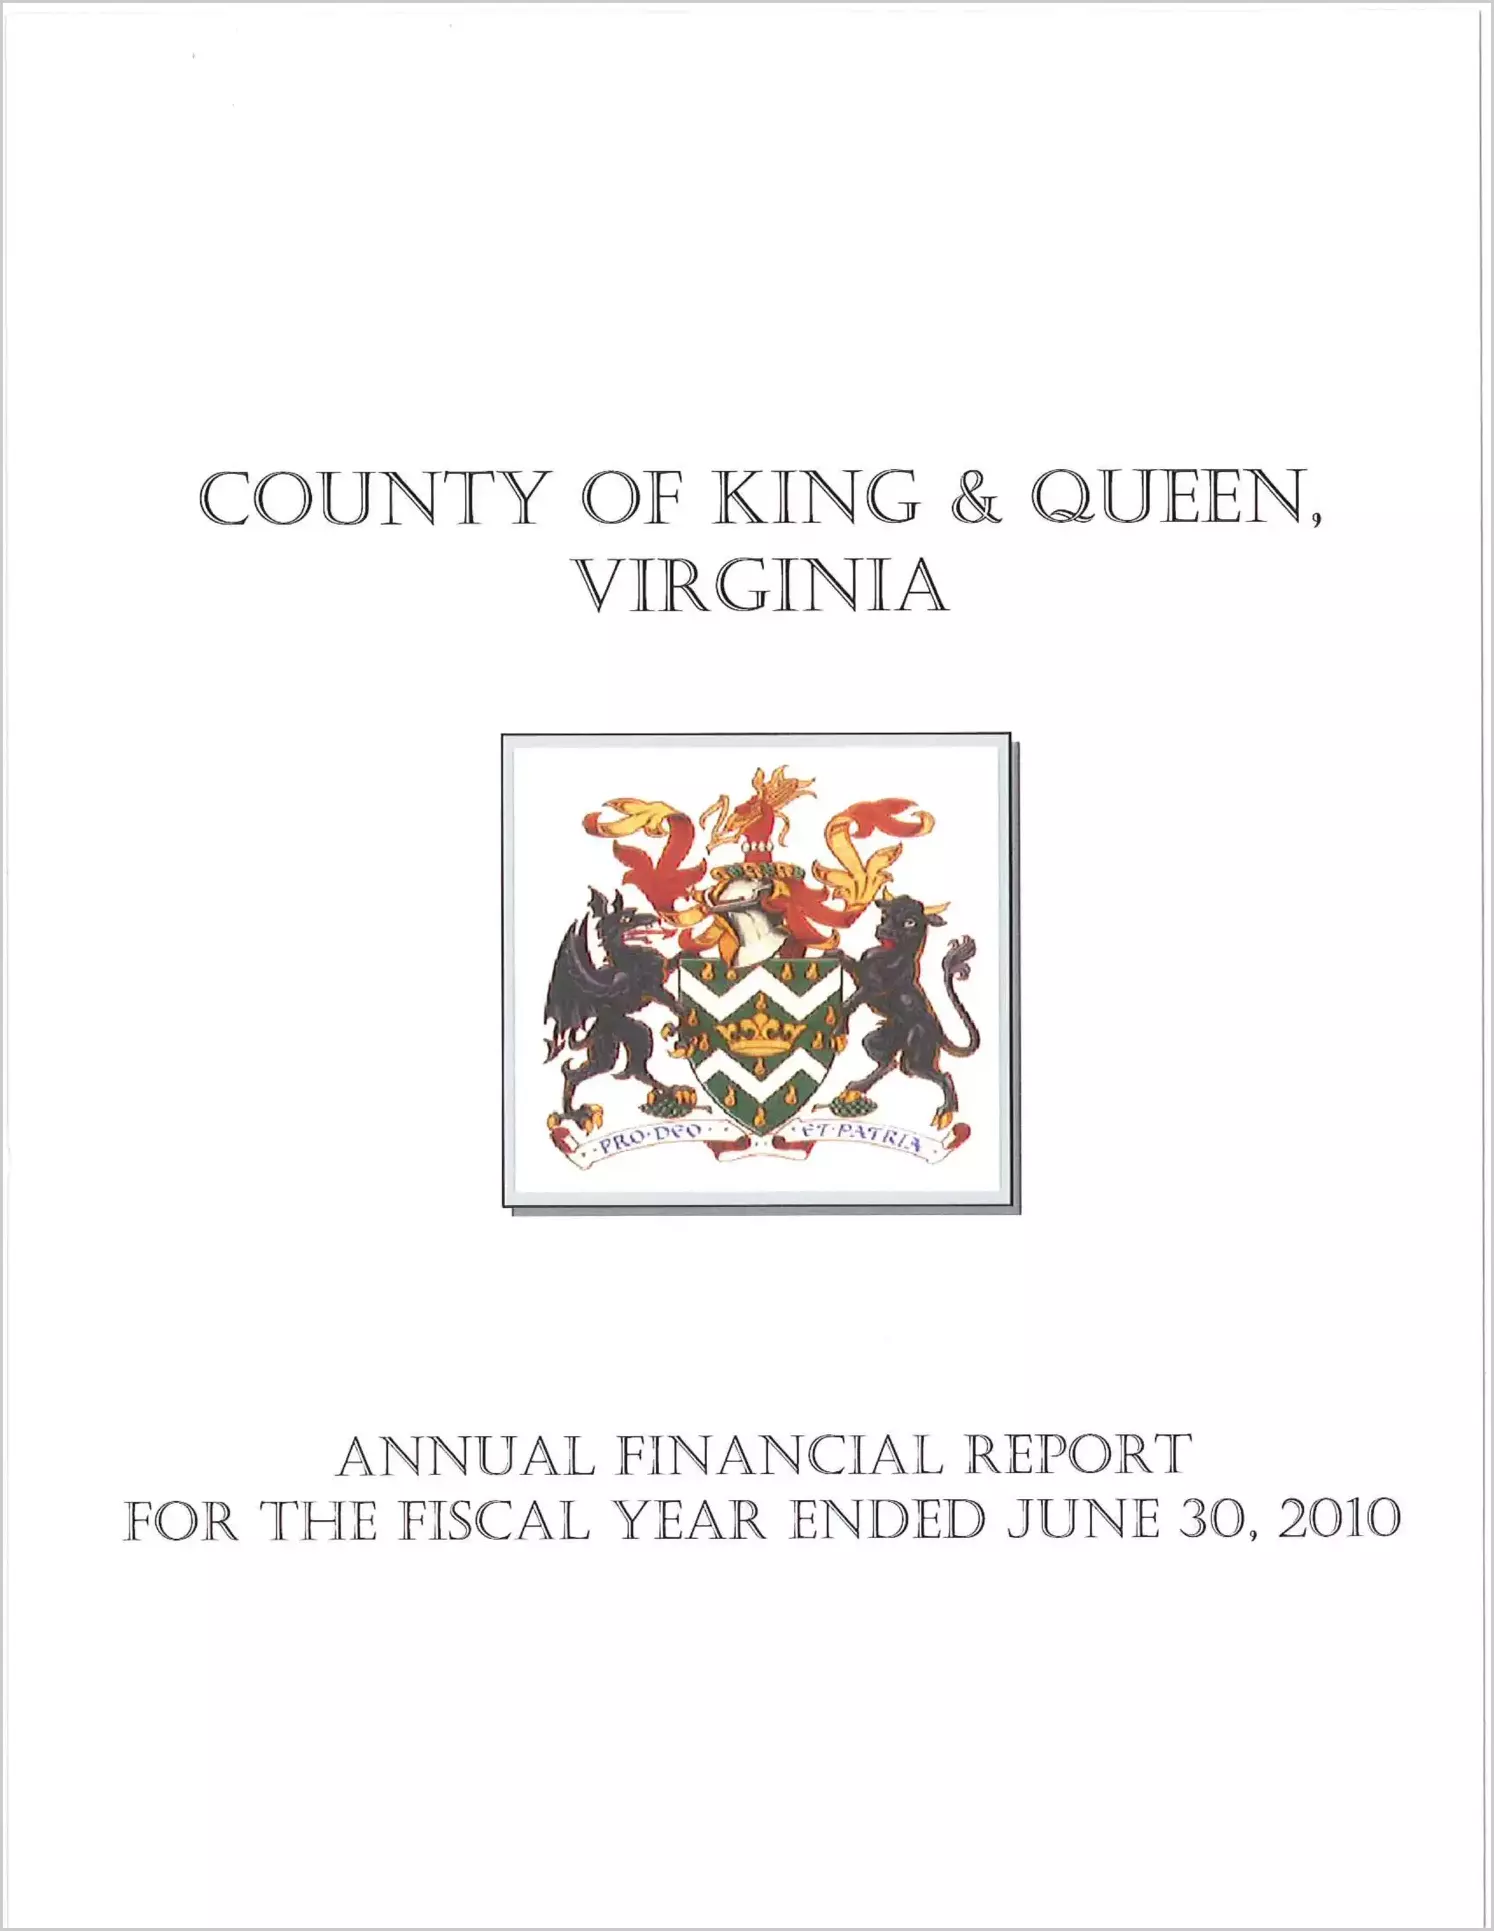 2010 Annual Financial Report for County of King & Queen